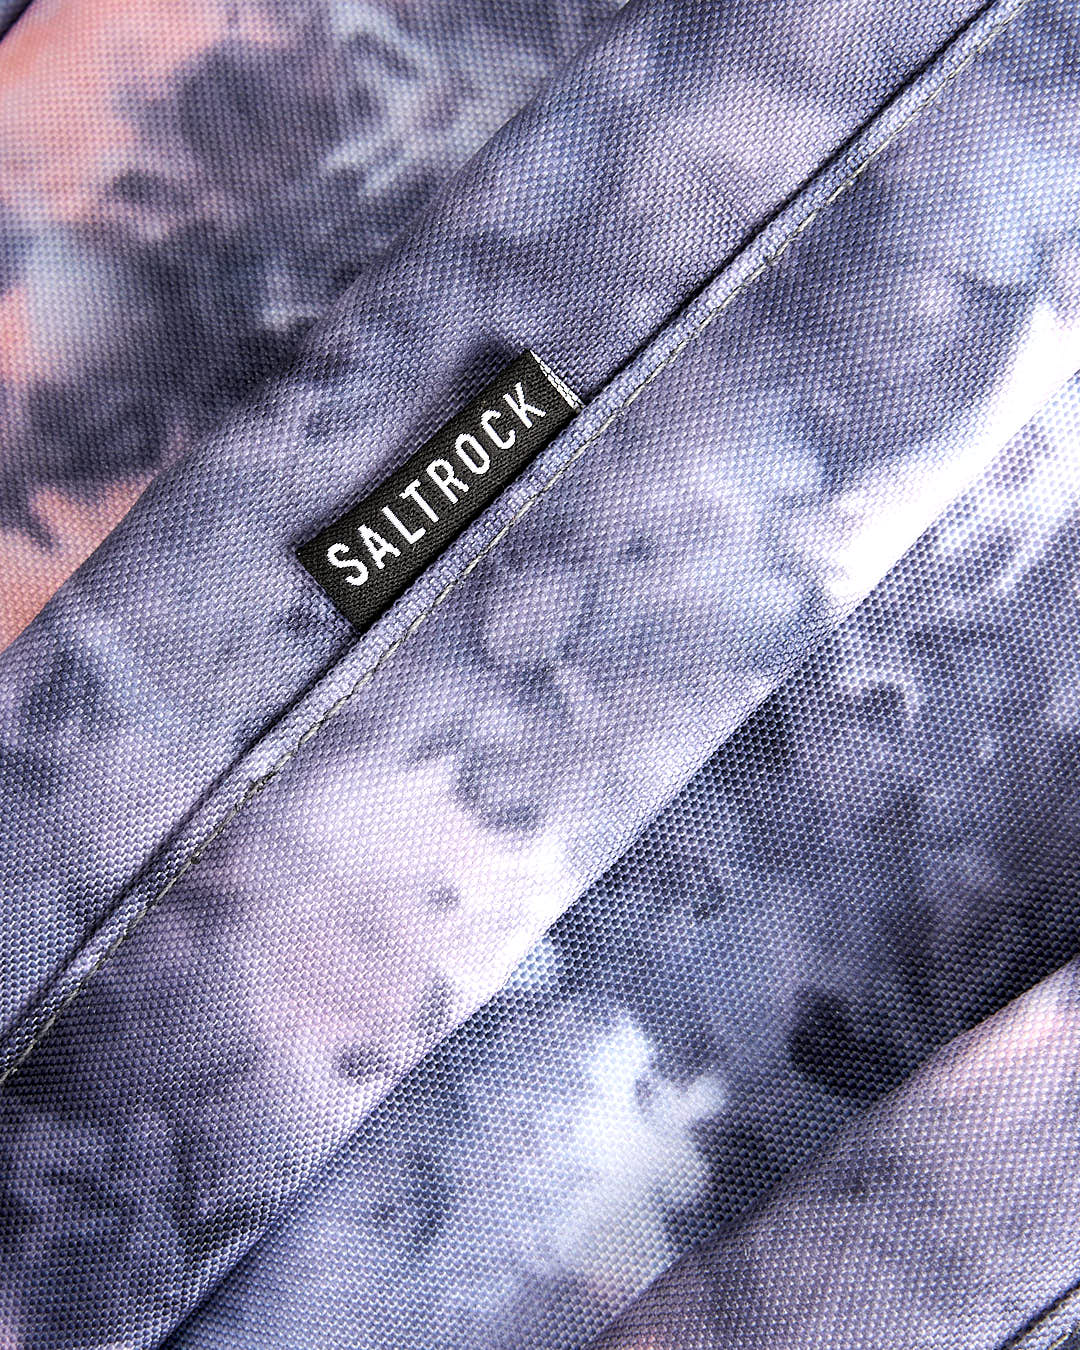 A close up of a Saltrock Uni-Vision - Backpack - Pink with a tie dye pattern.